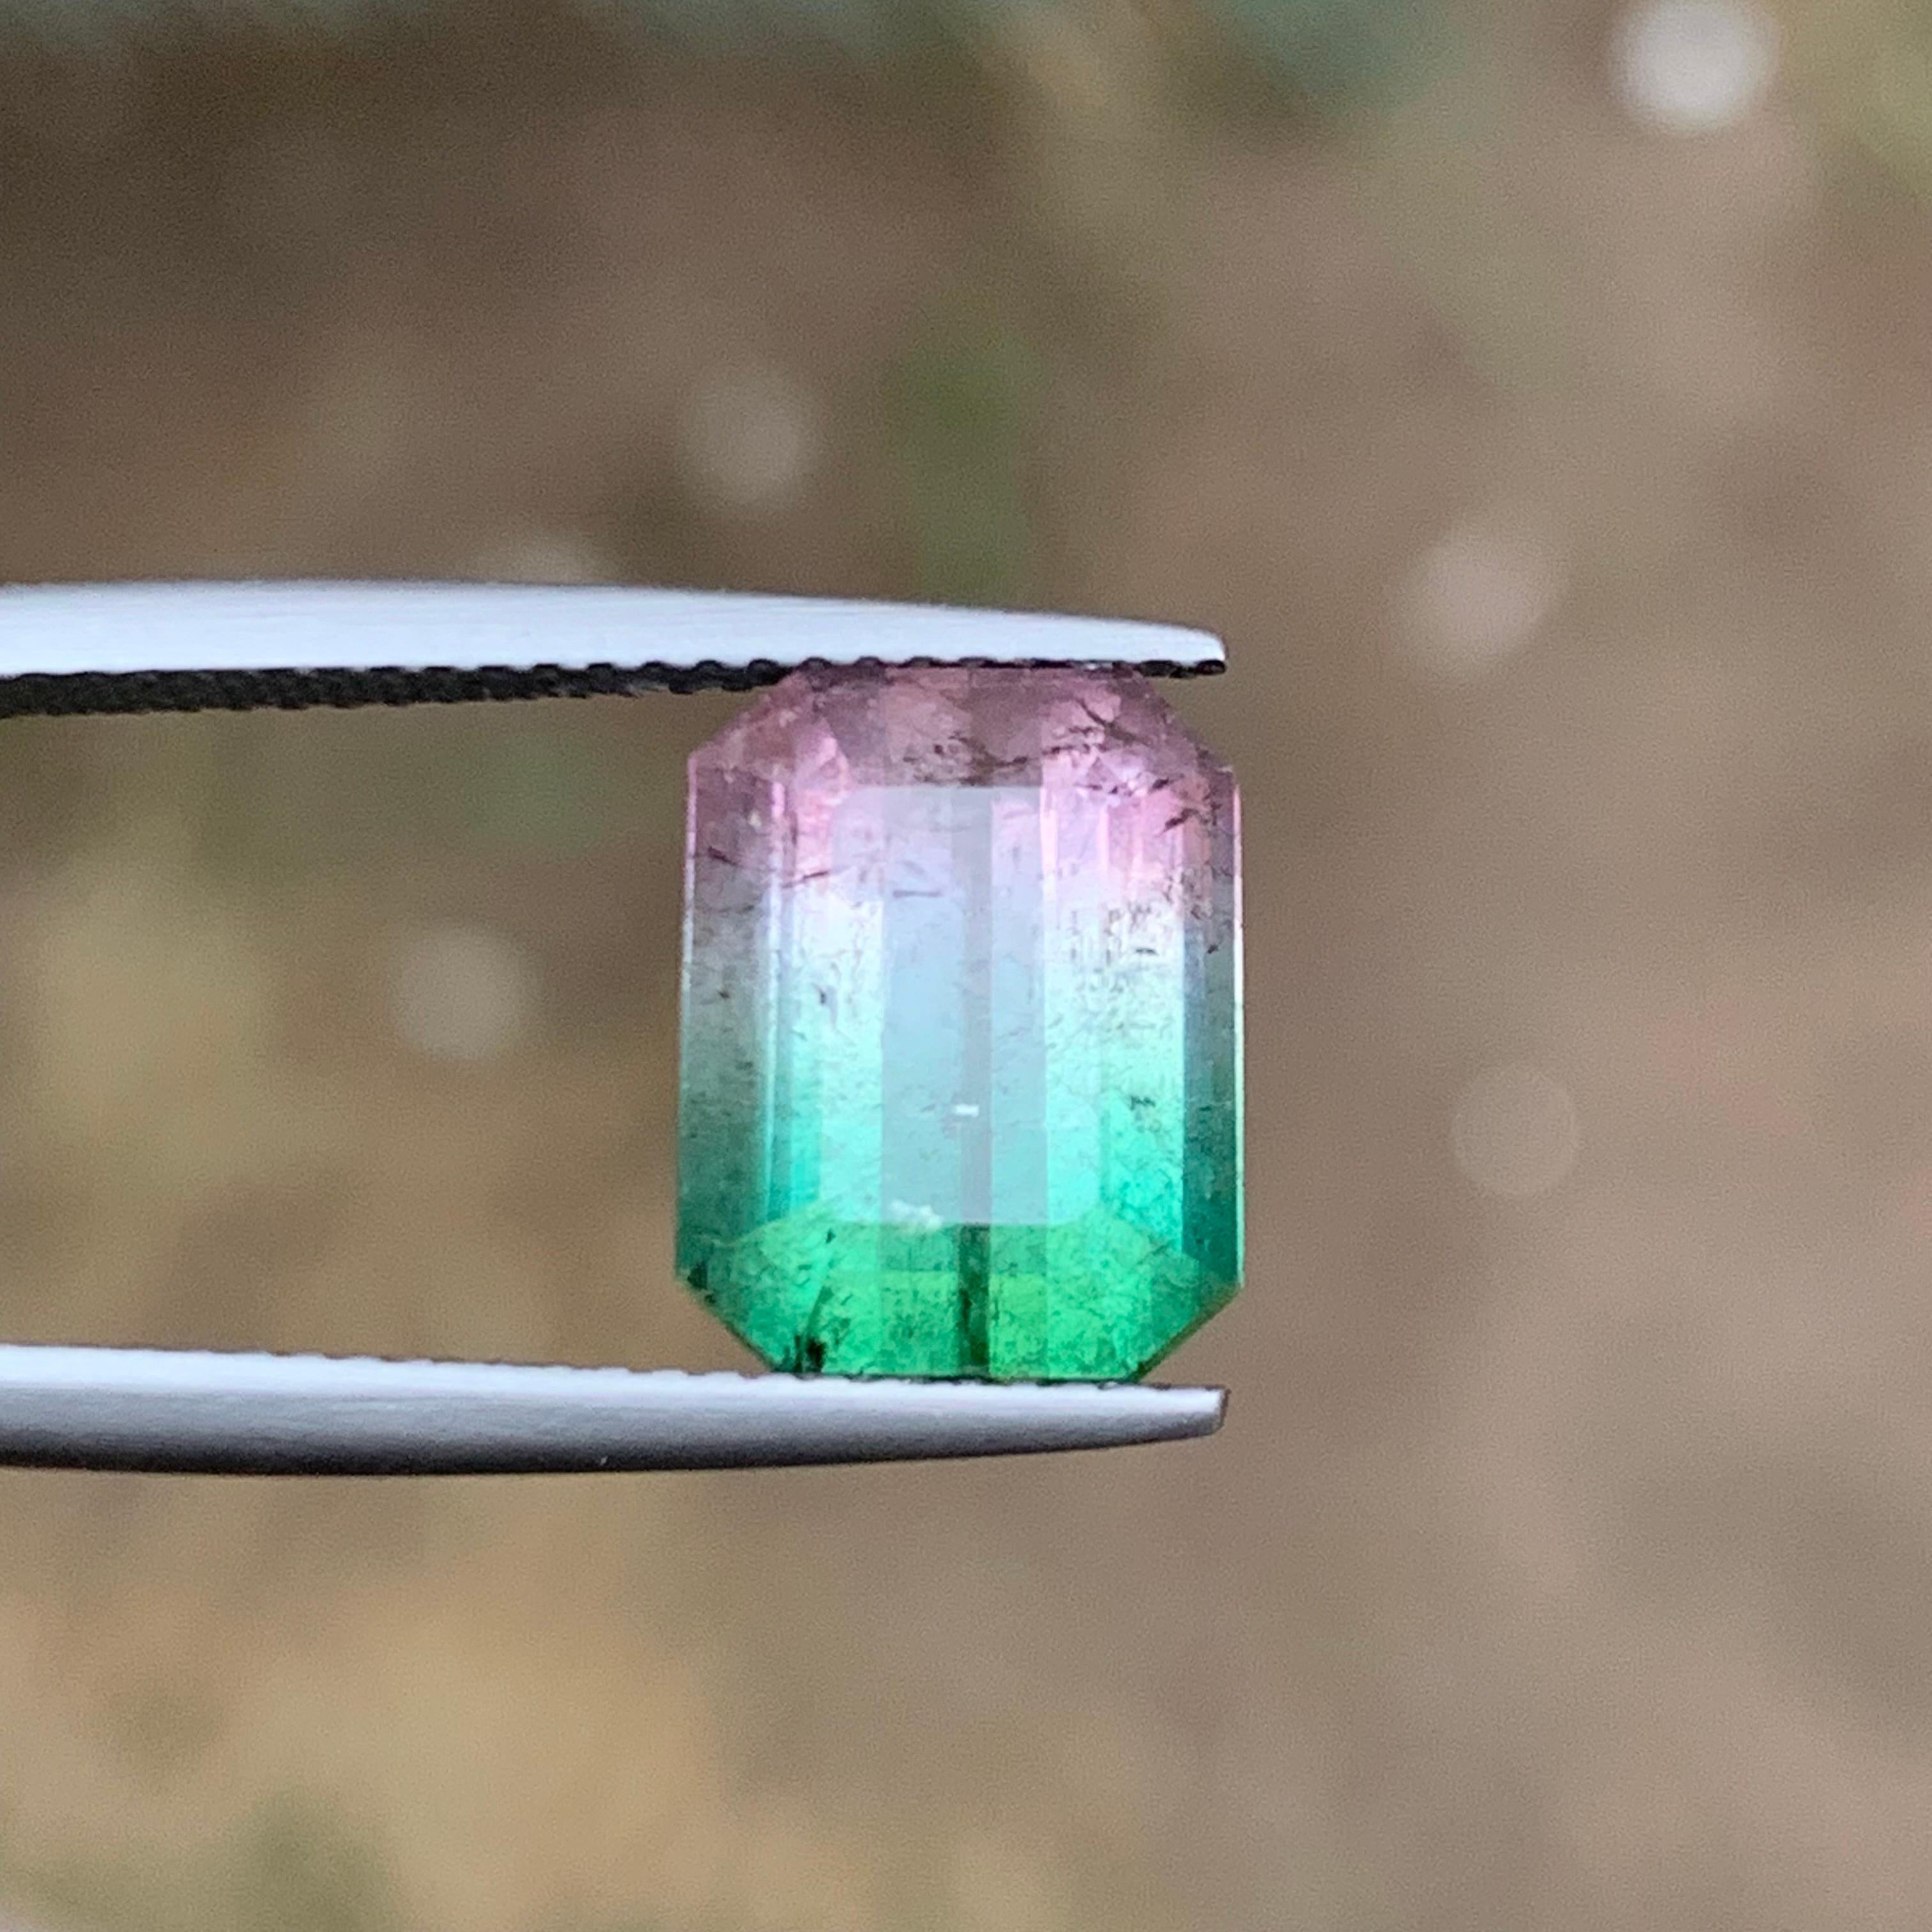 Rare Bicolor Watermelon Bluish Green & Pink Tourmaline Gemstone 5.90 Ct for Ring For Sale 1